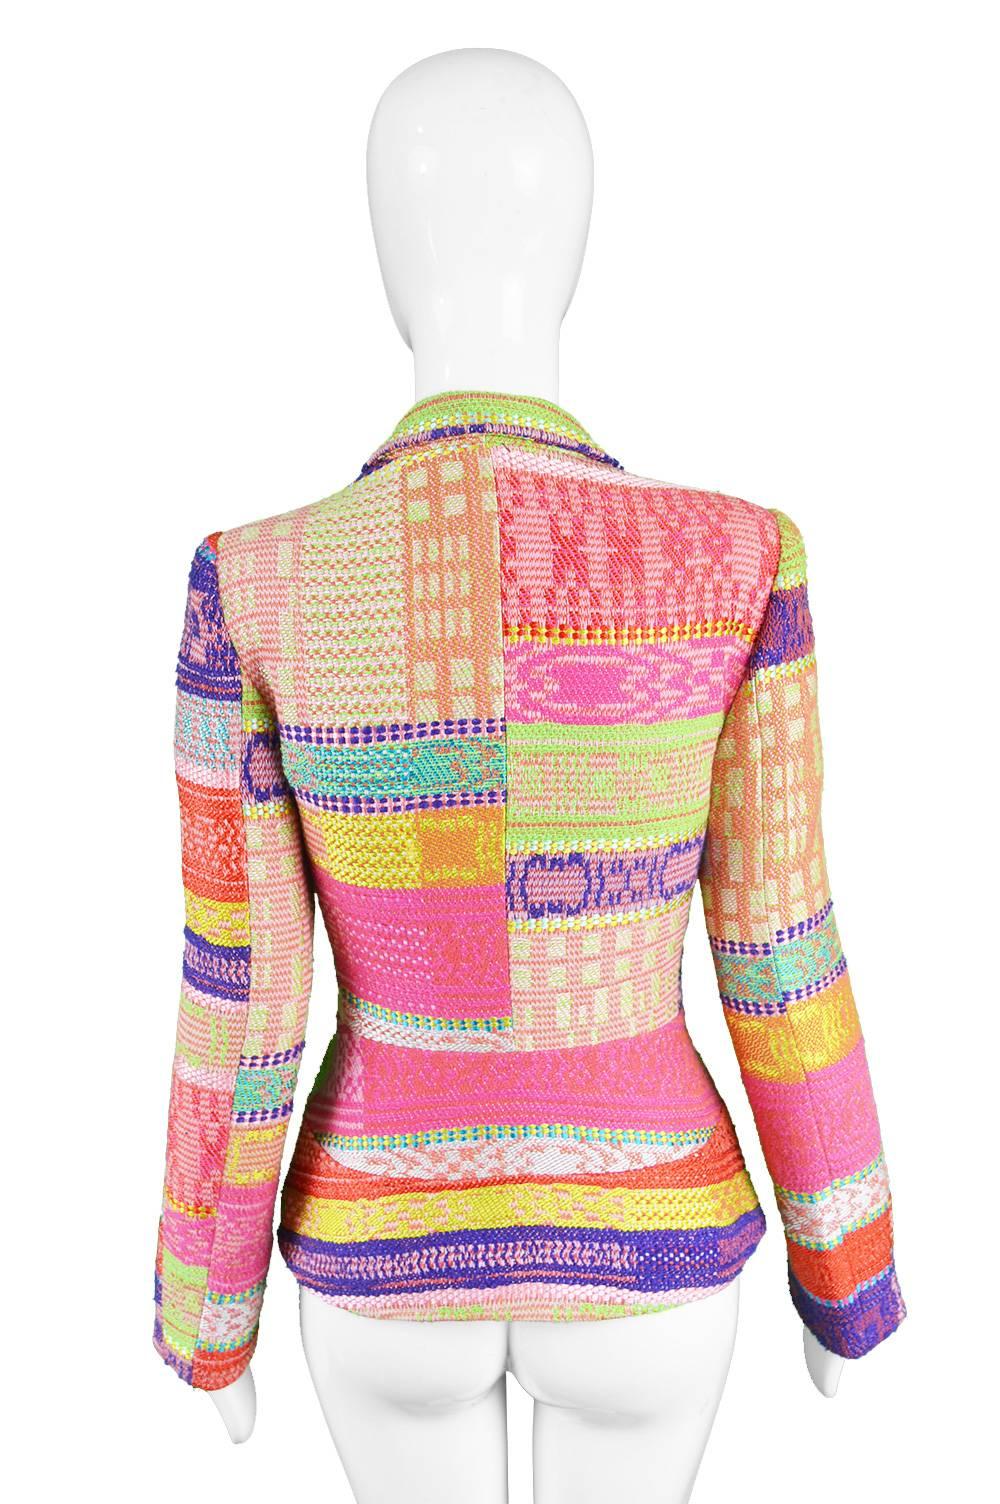 Christian Lacroix Brightly Multicolored Woven Tapestry Women's Blazer Jacket 1